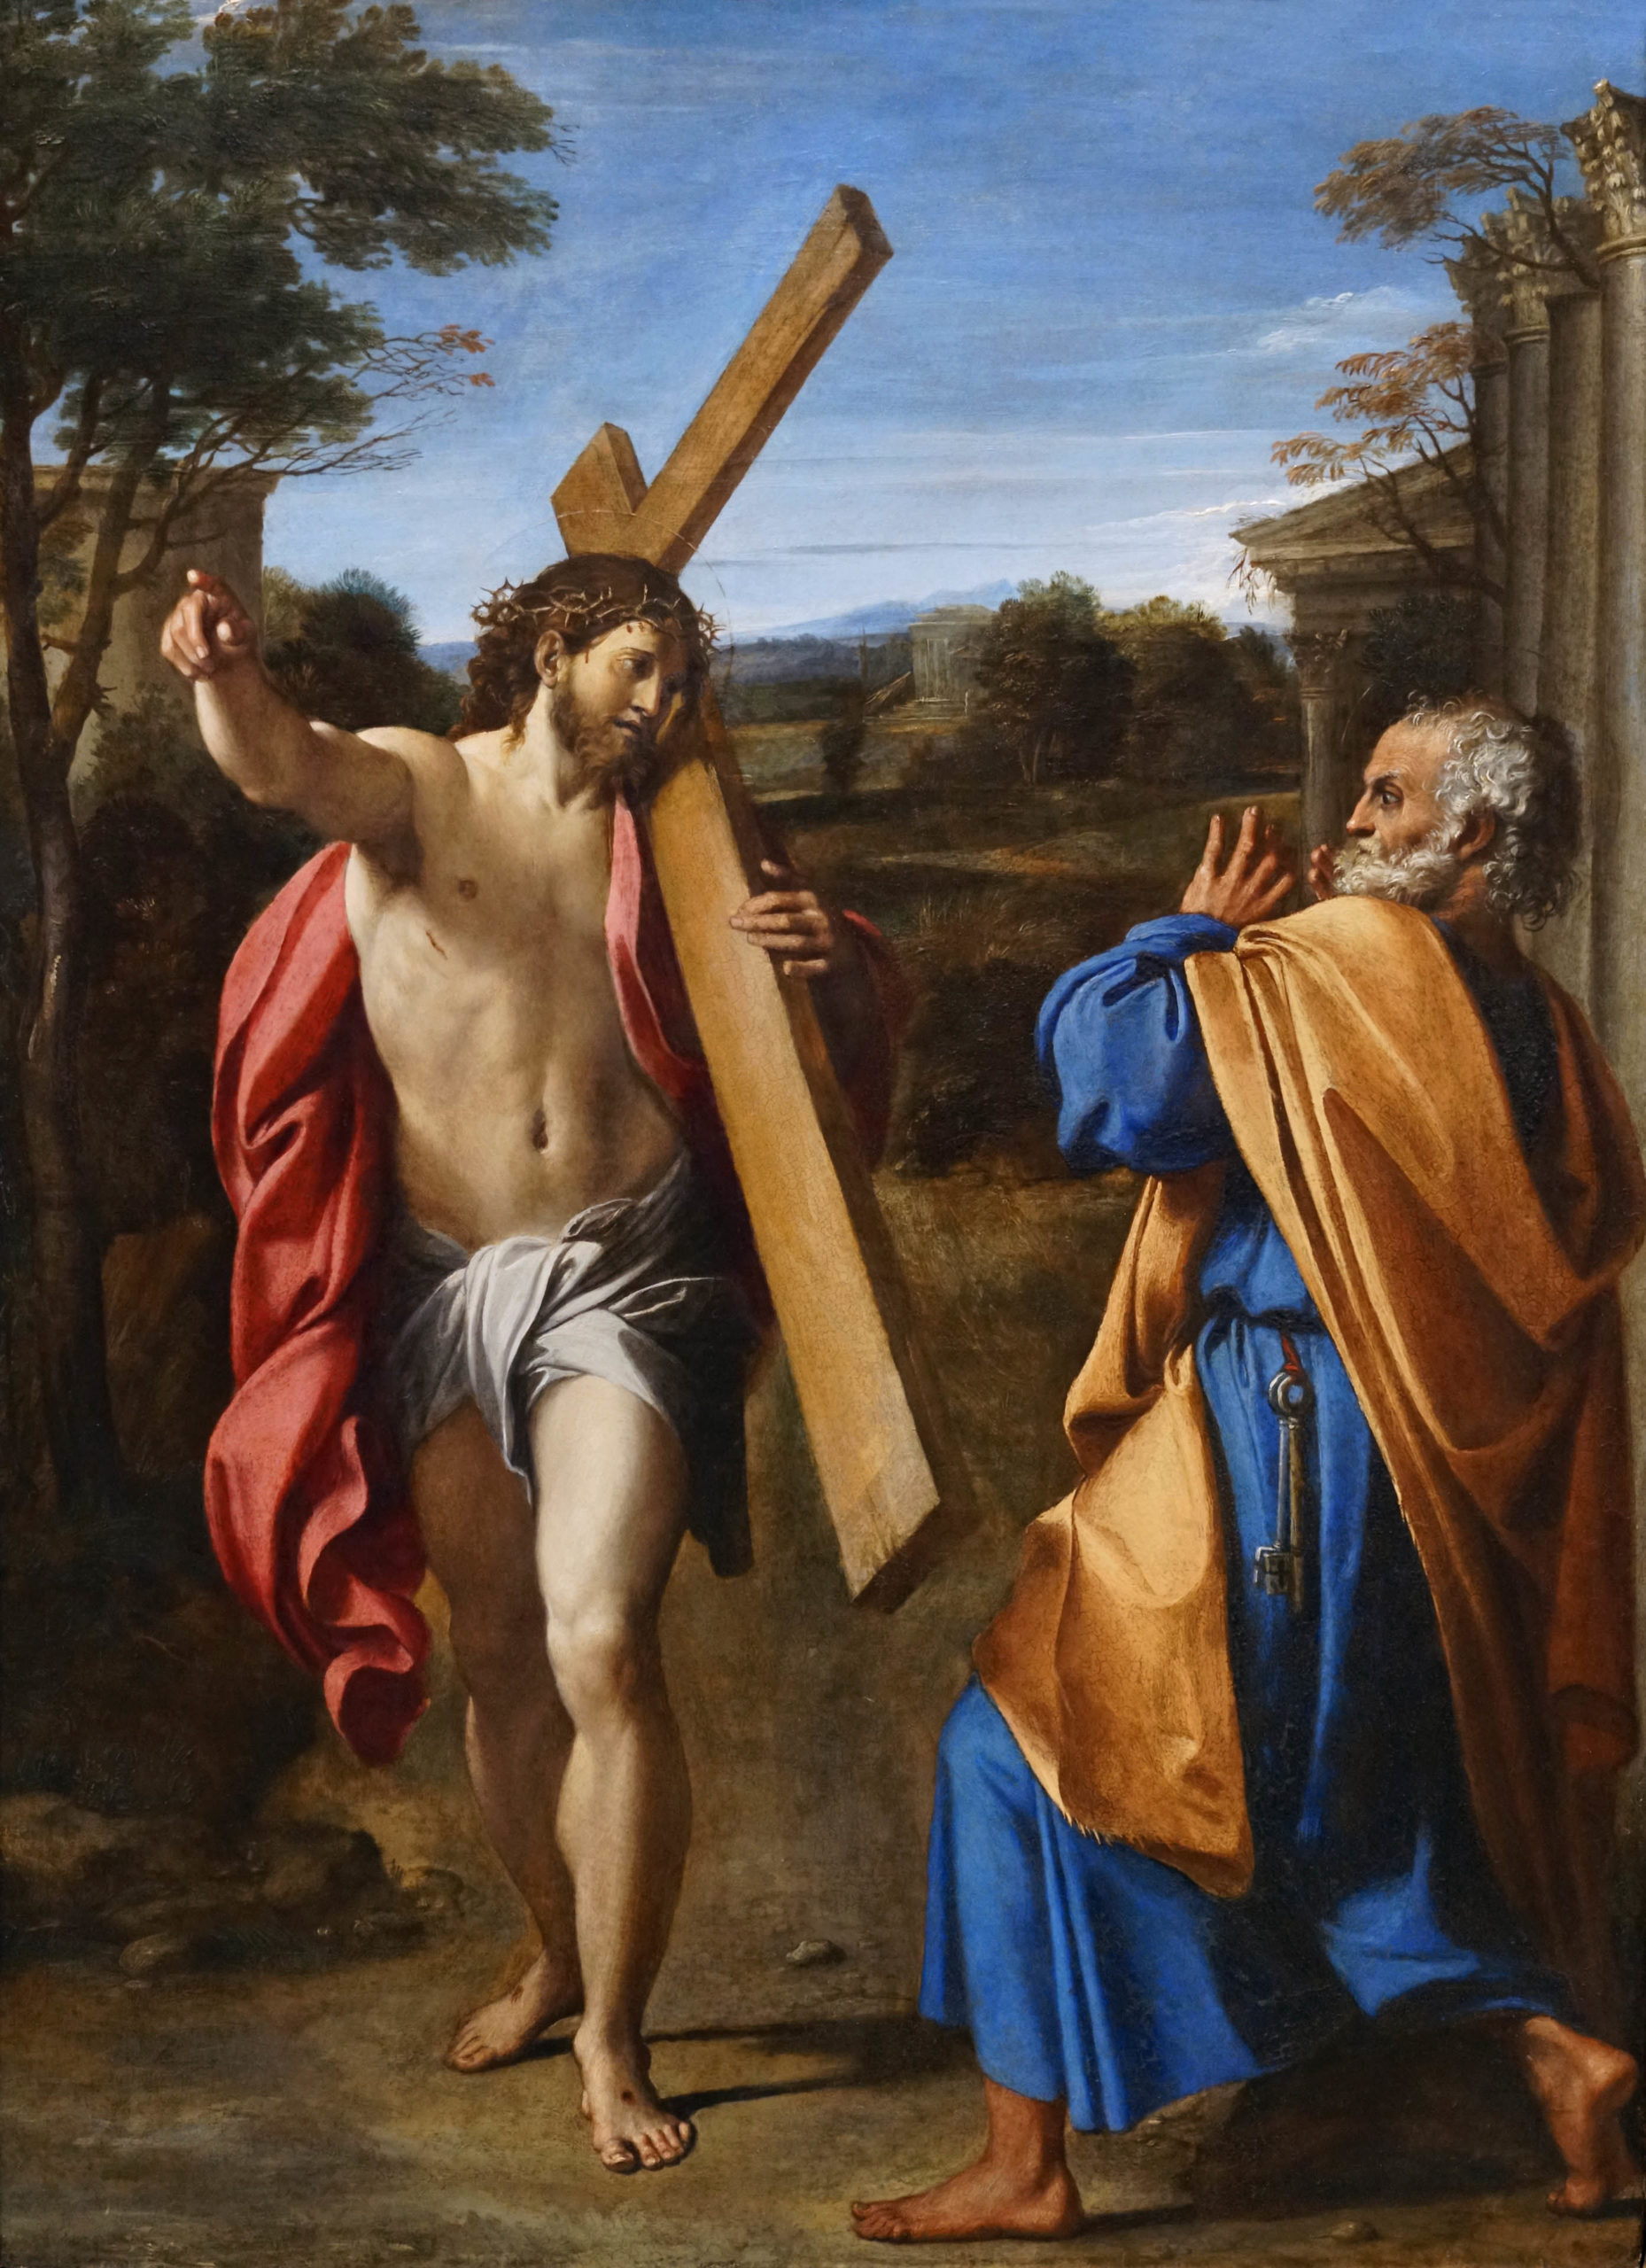 Annibale Carracci, Christ Appearing to Saint Peter on the Appian Way (also known as Domine quo vadis), 1601-02, oil on wood, 77.4 x 56.3 cm (The National Gallery, photo: Steven Zucker, CC BY-NC-SA 2.0)